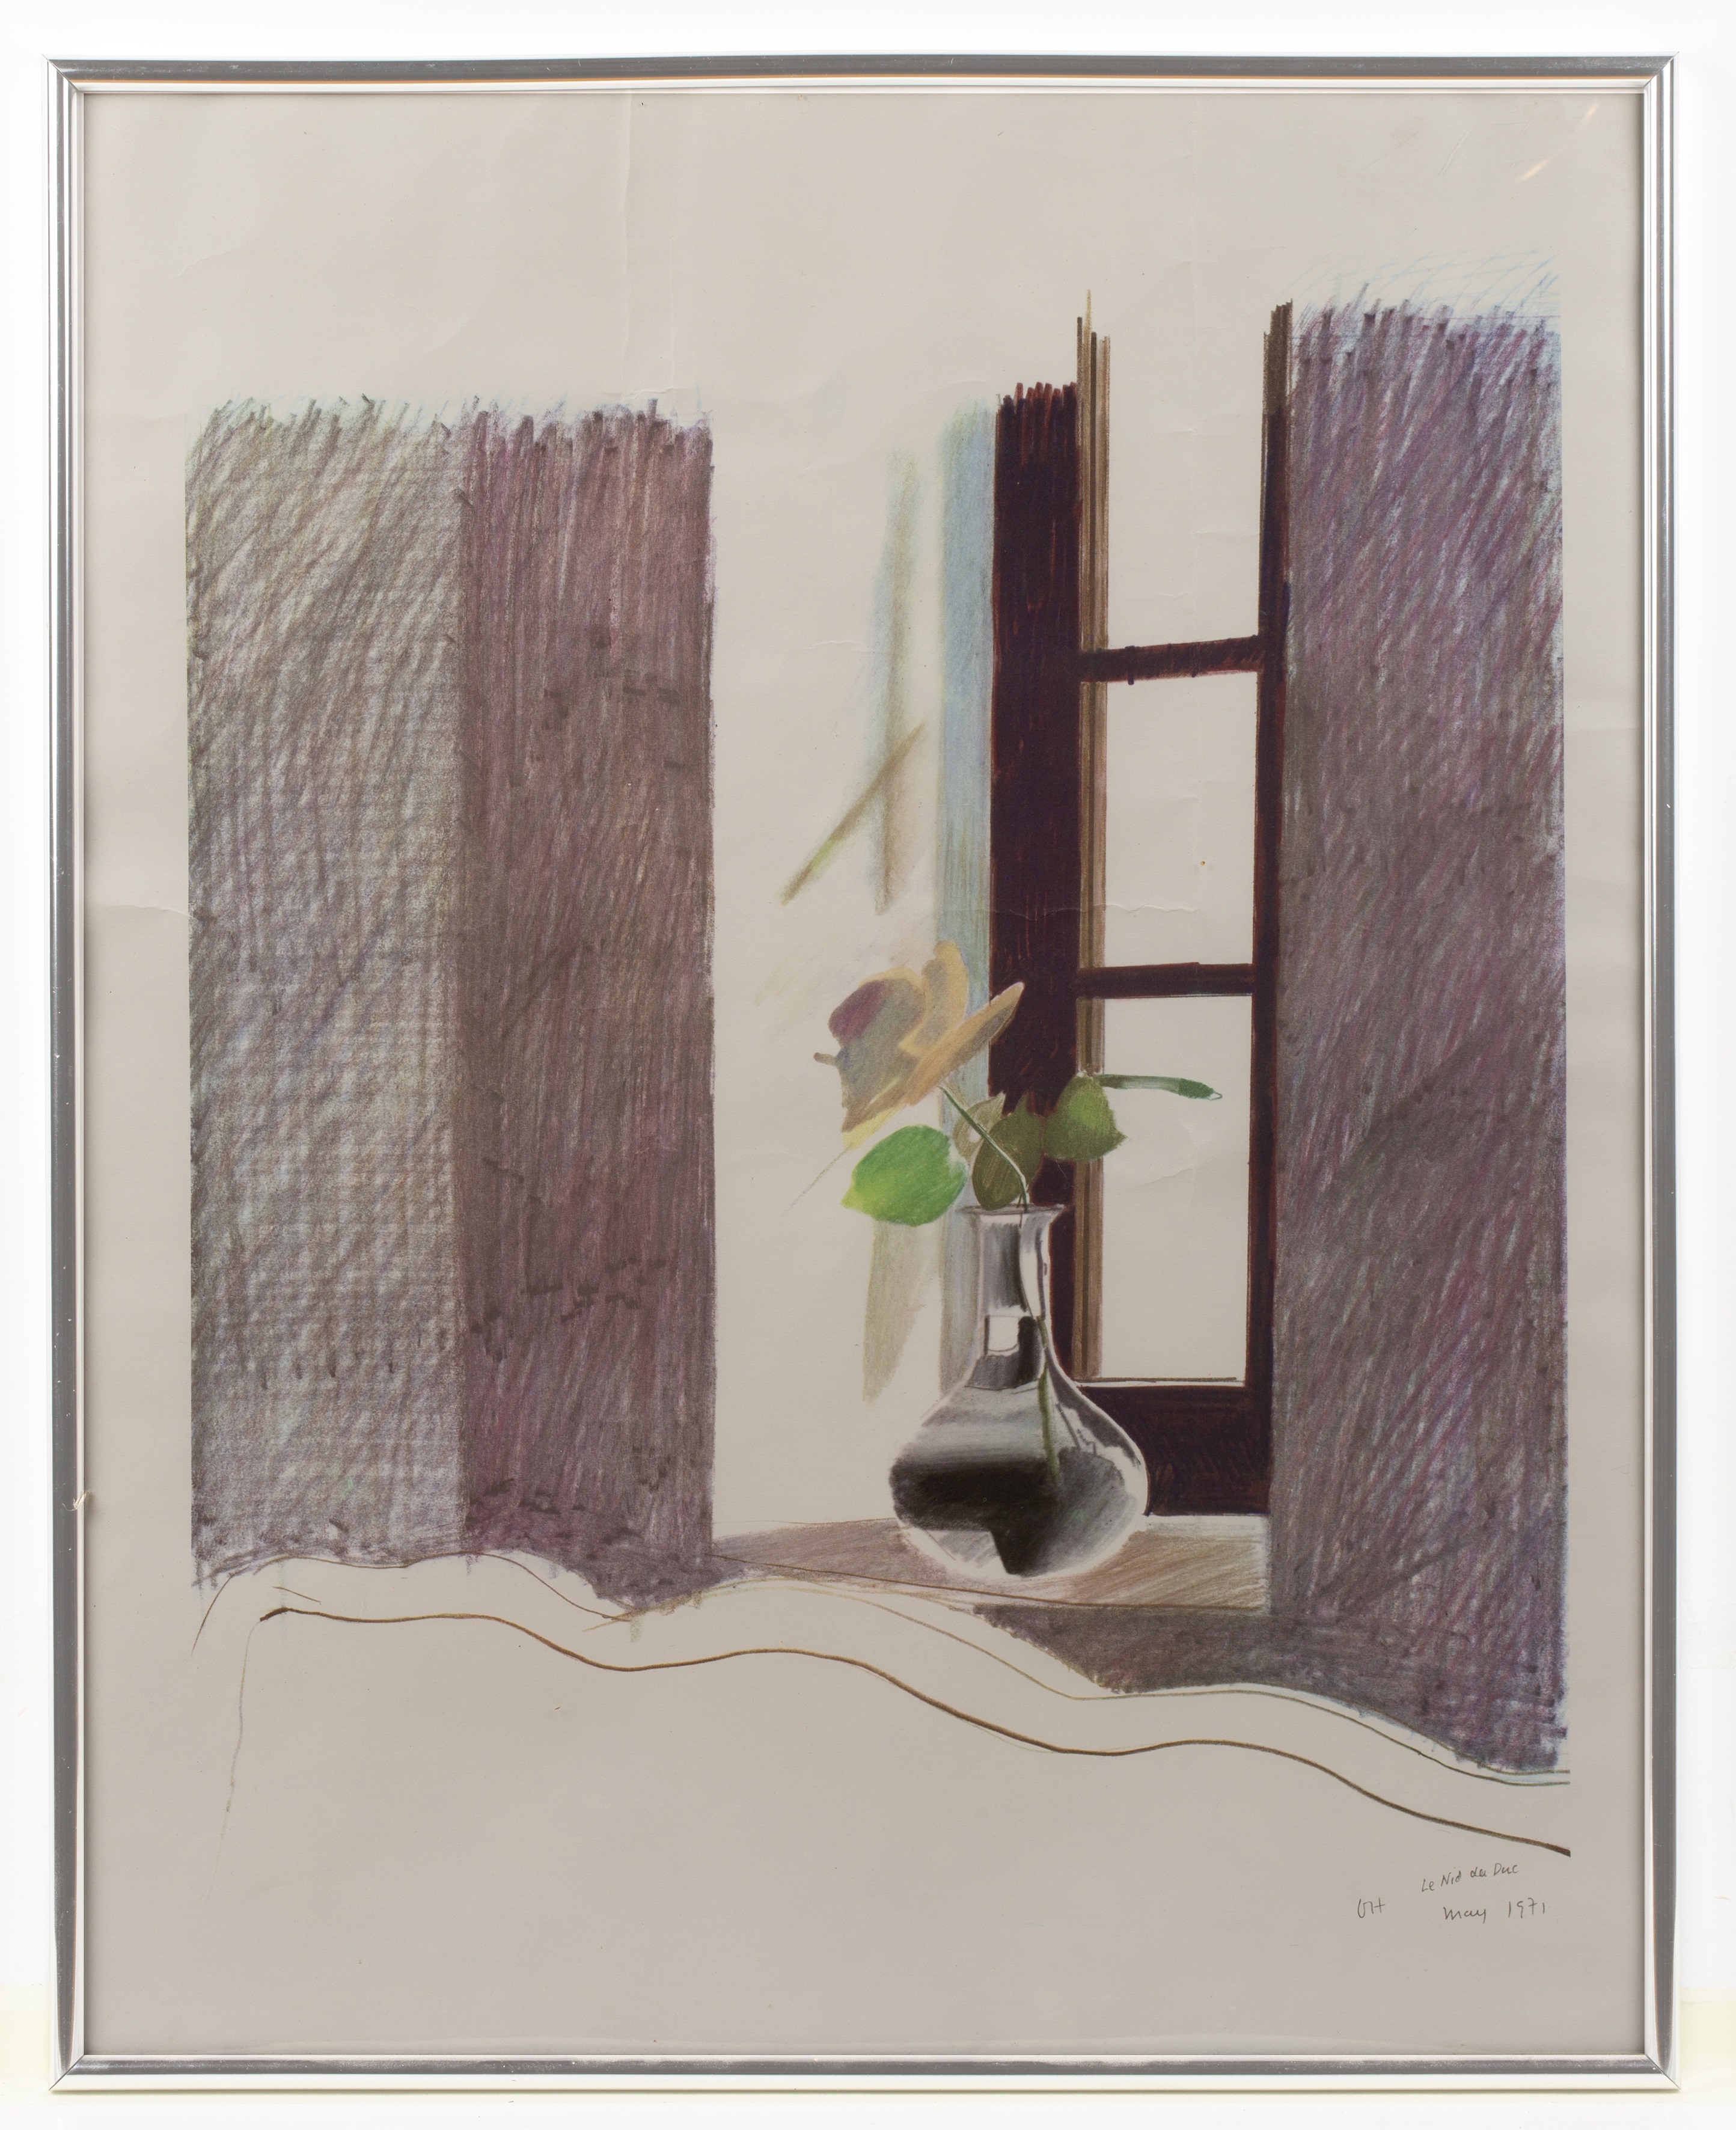 David Hockney (b.1937) 'Rose in a window', lithograph, 50cm x 39.5cm Overall scuffs, marks and - Image 2 of 3